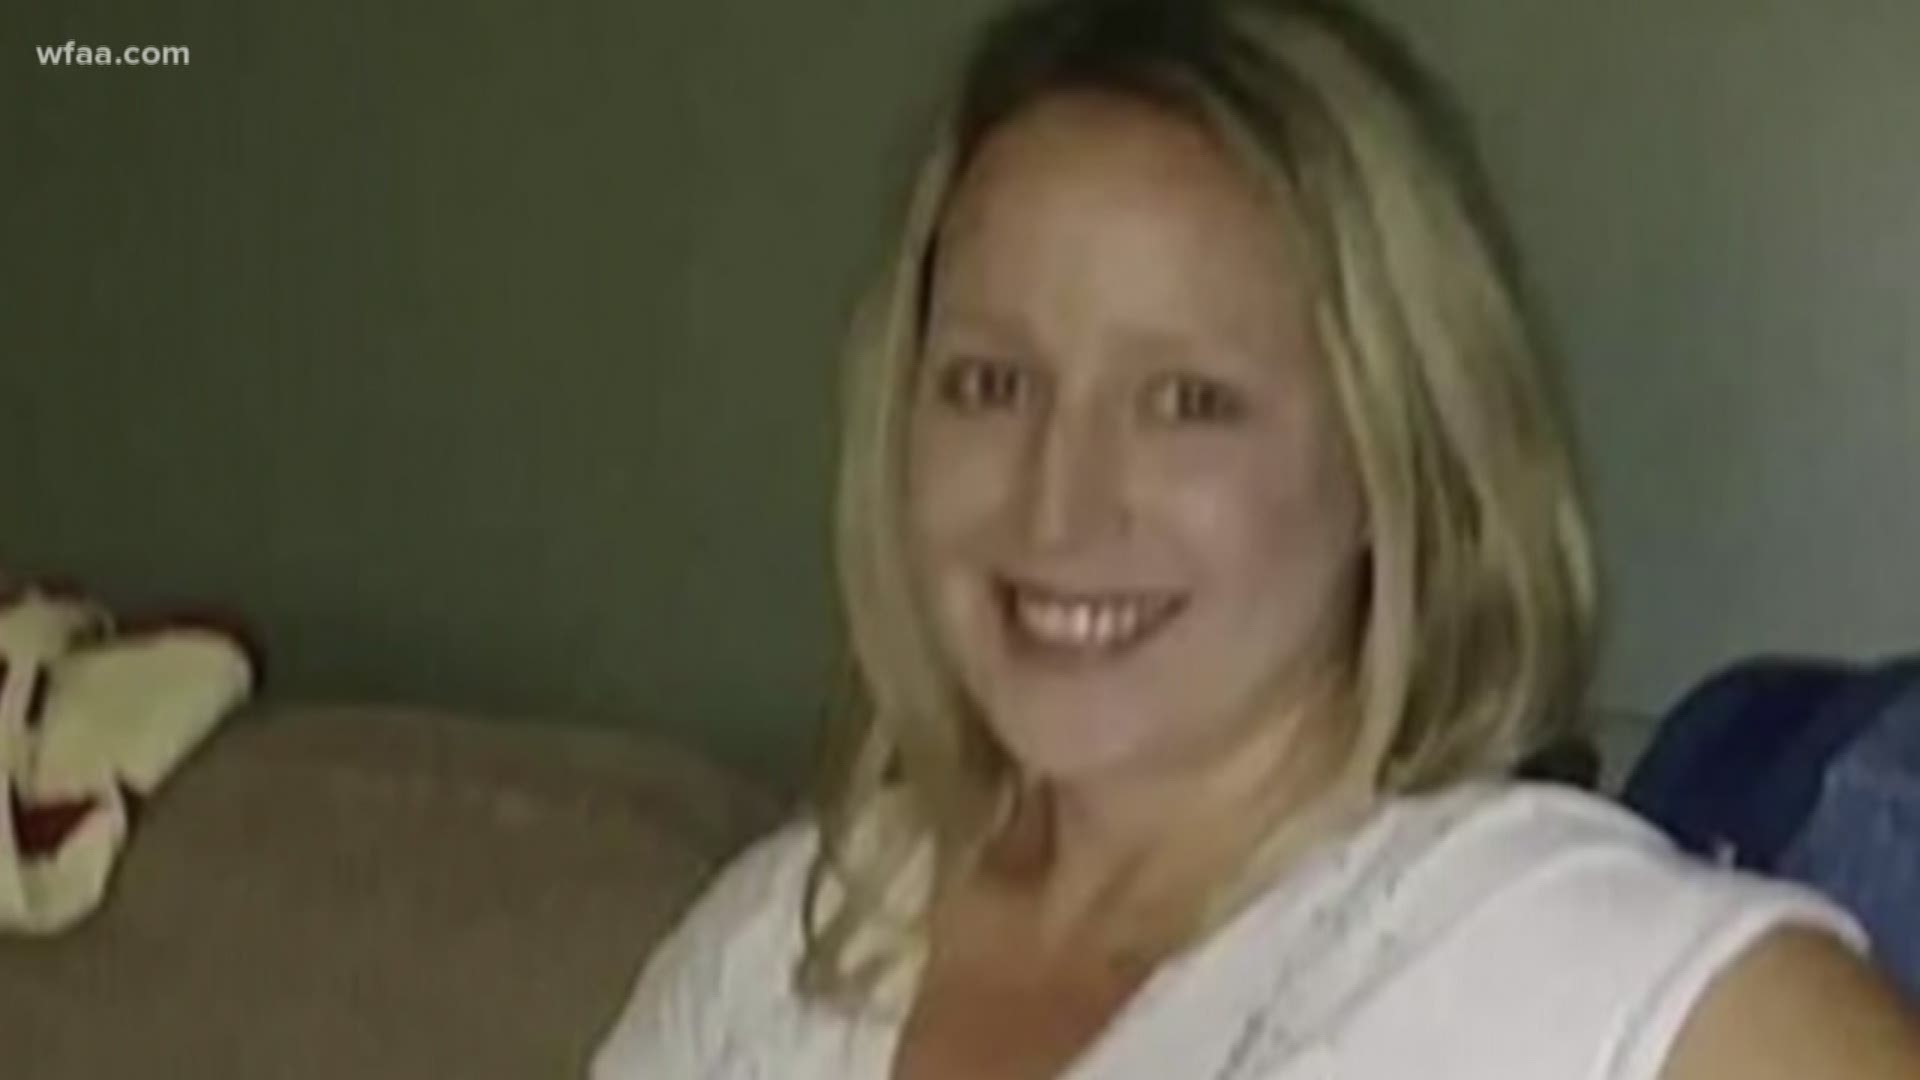 Ennis mother's mysterious disappearance